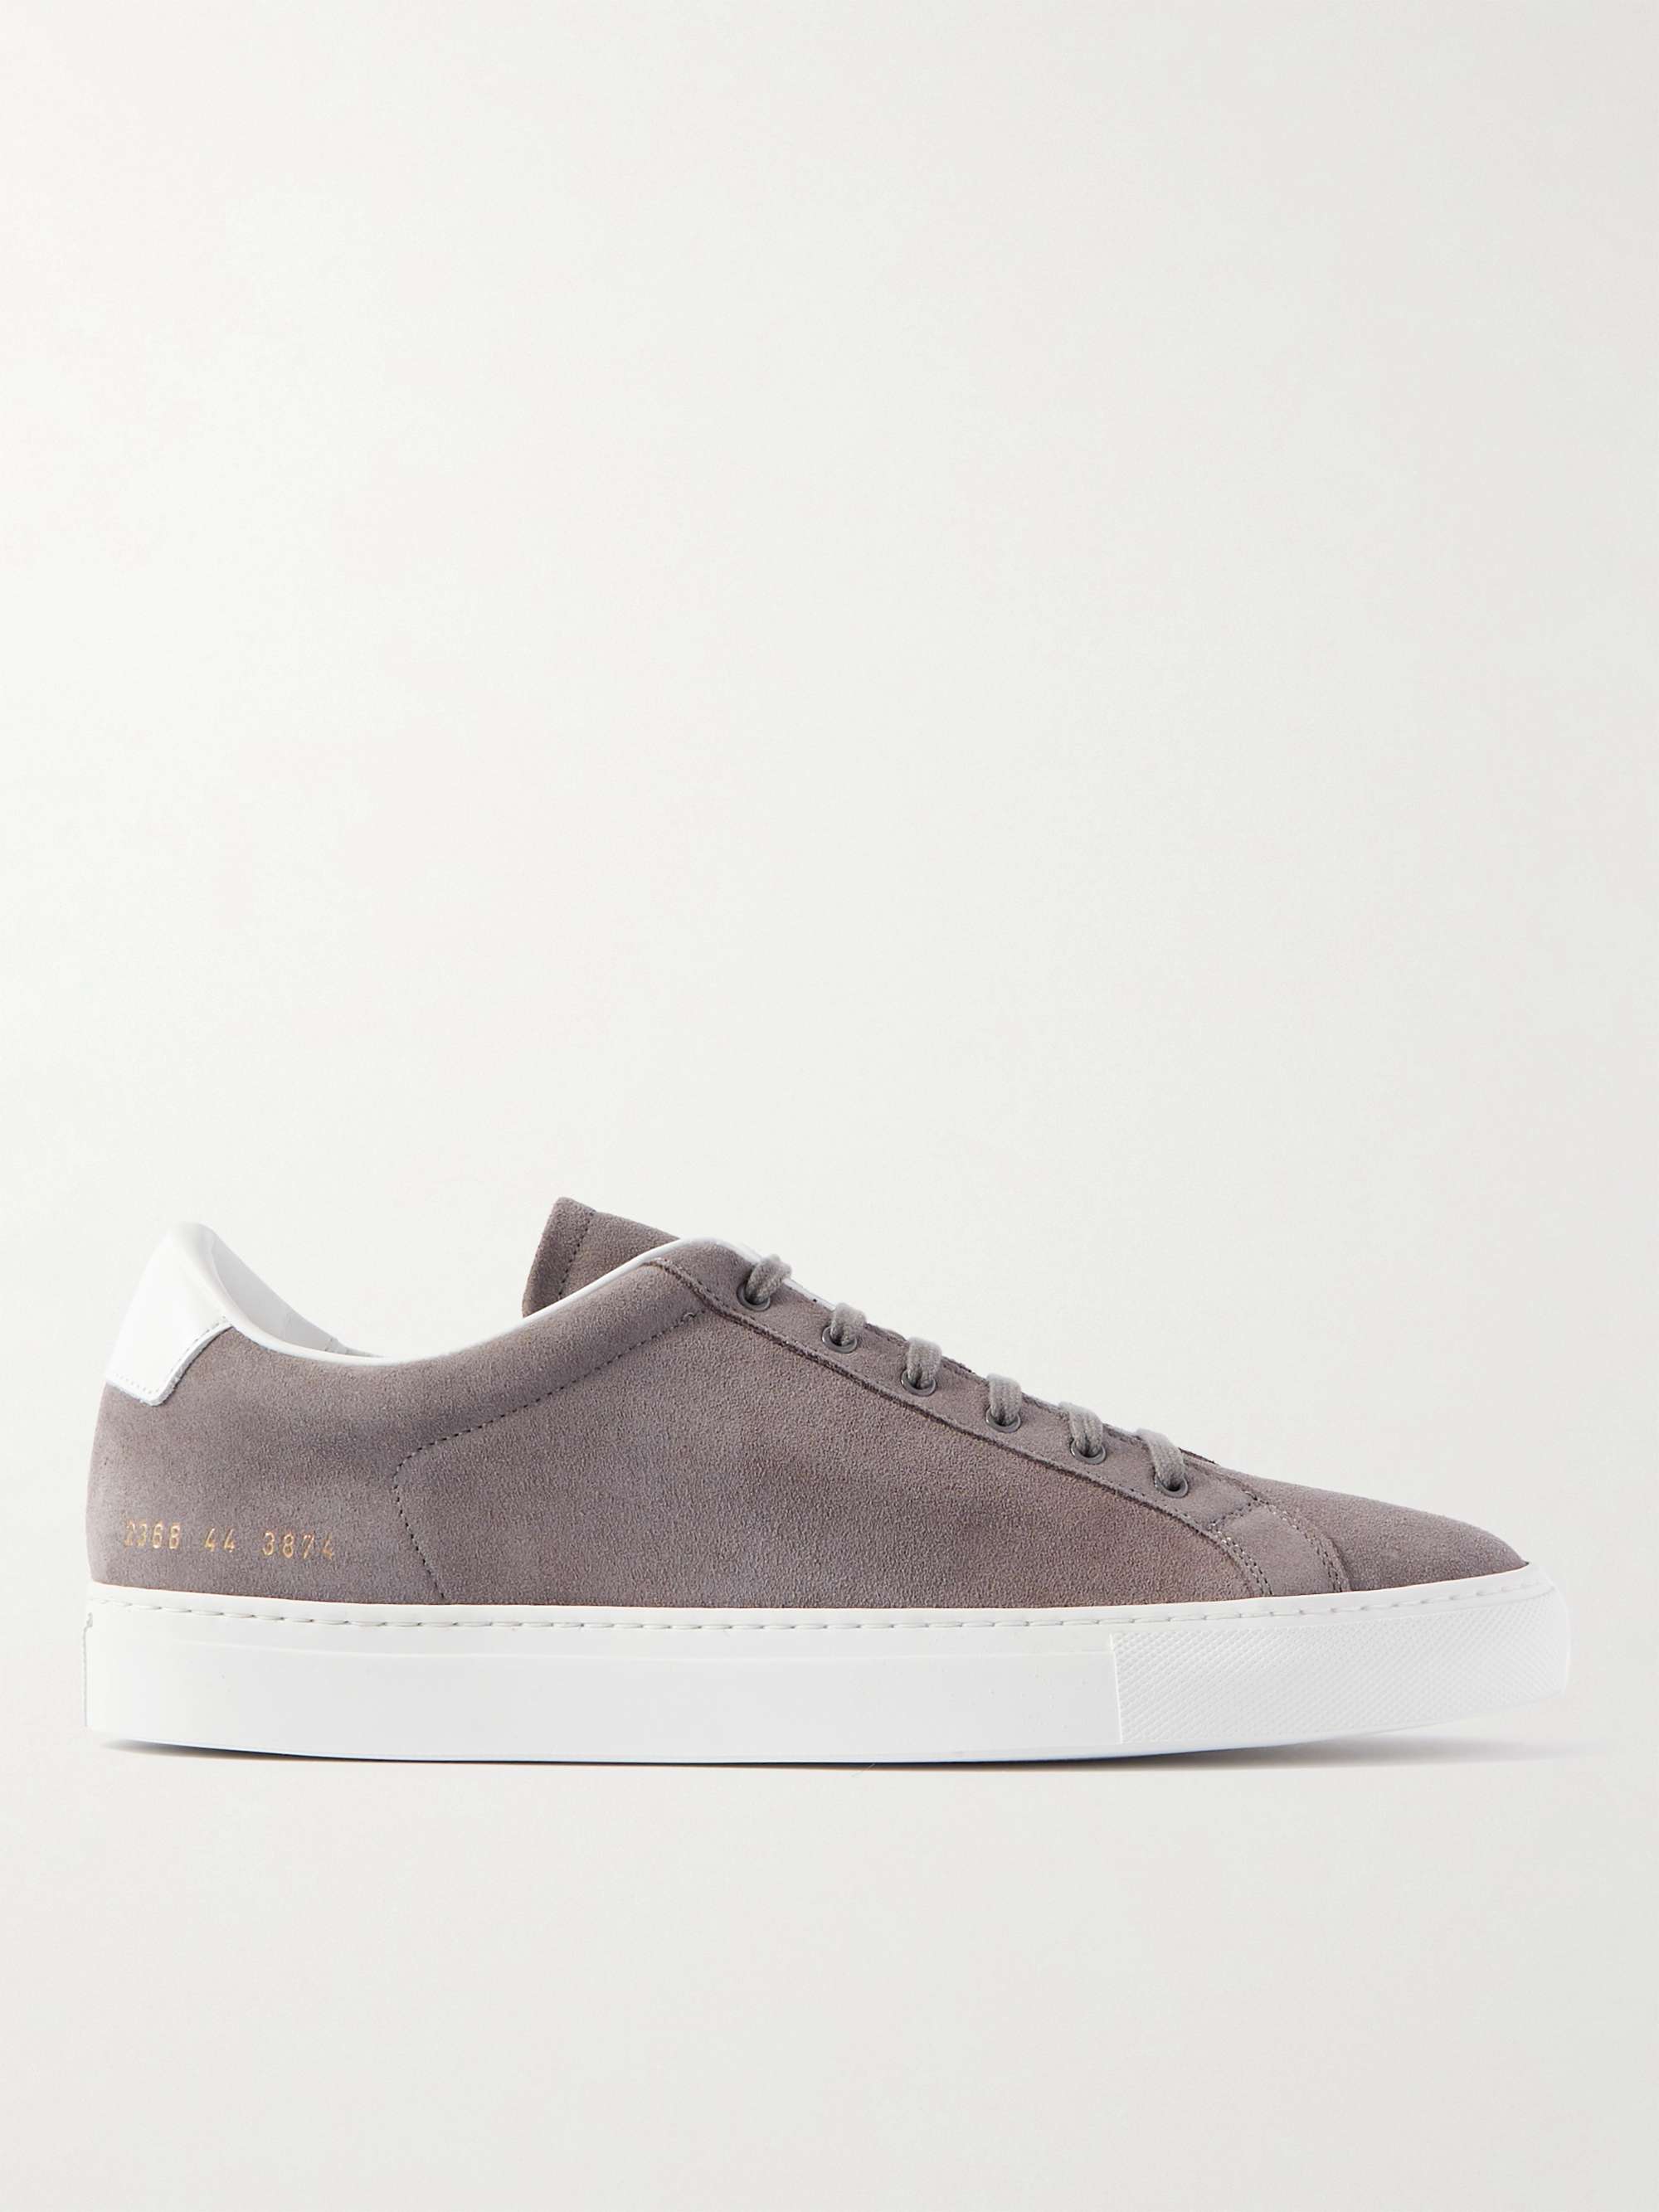 COMMON PROJECTS Retro Low Leather-Trimmed Suede Sneakers for Men | MR PORTER